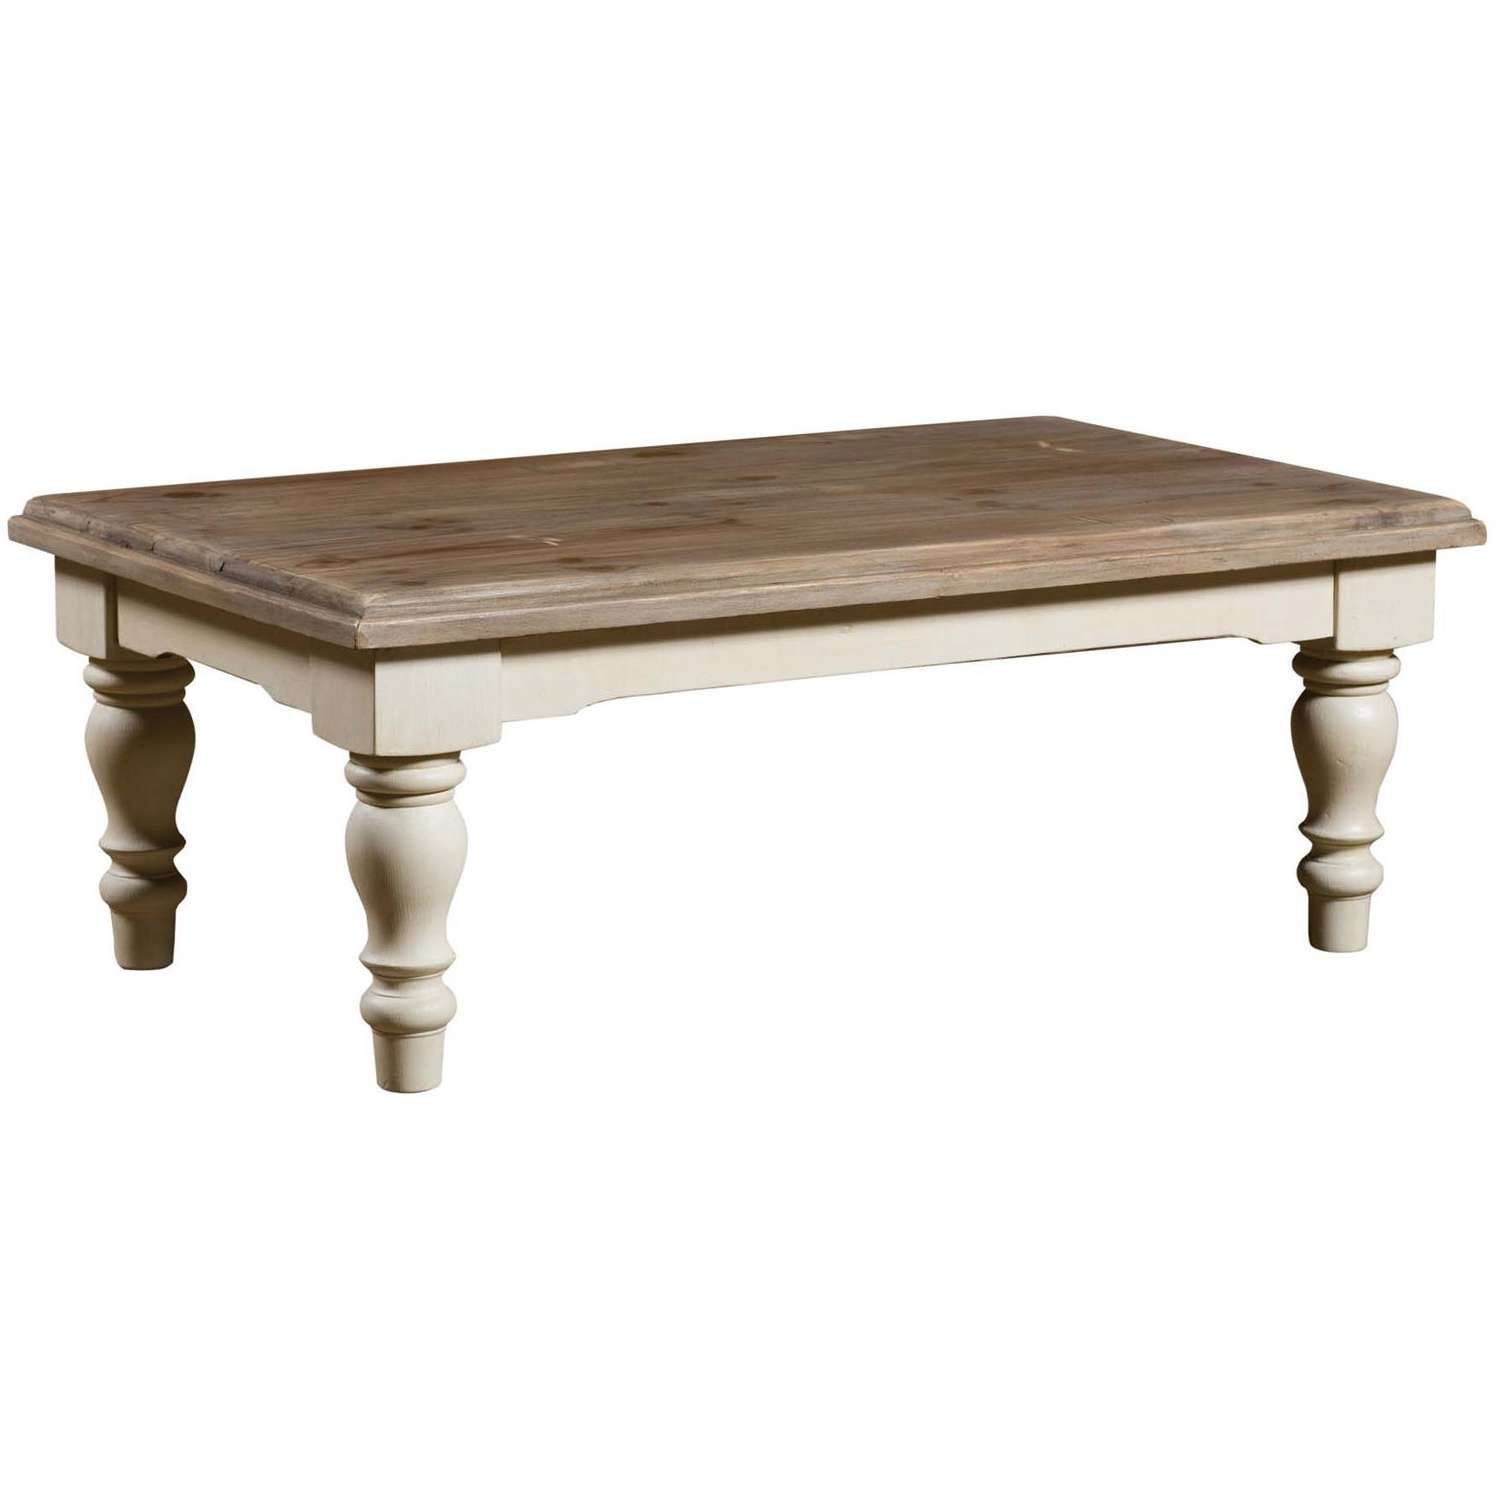 Beige And Brown Rectangle Wood French Country Coffee Table Designs Pertaining To Preferred French Country Coffee Tables (View 7 of 20)